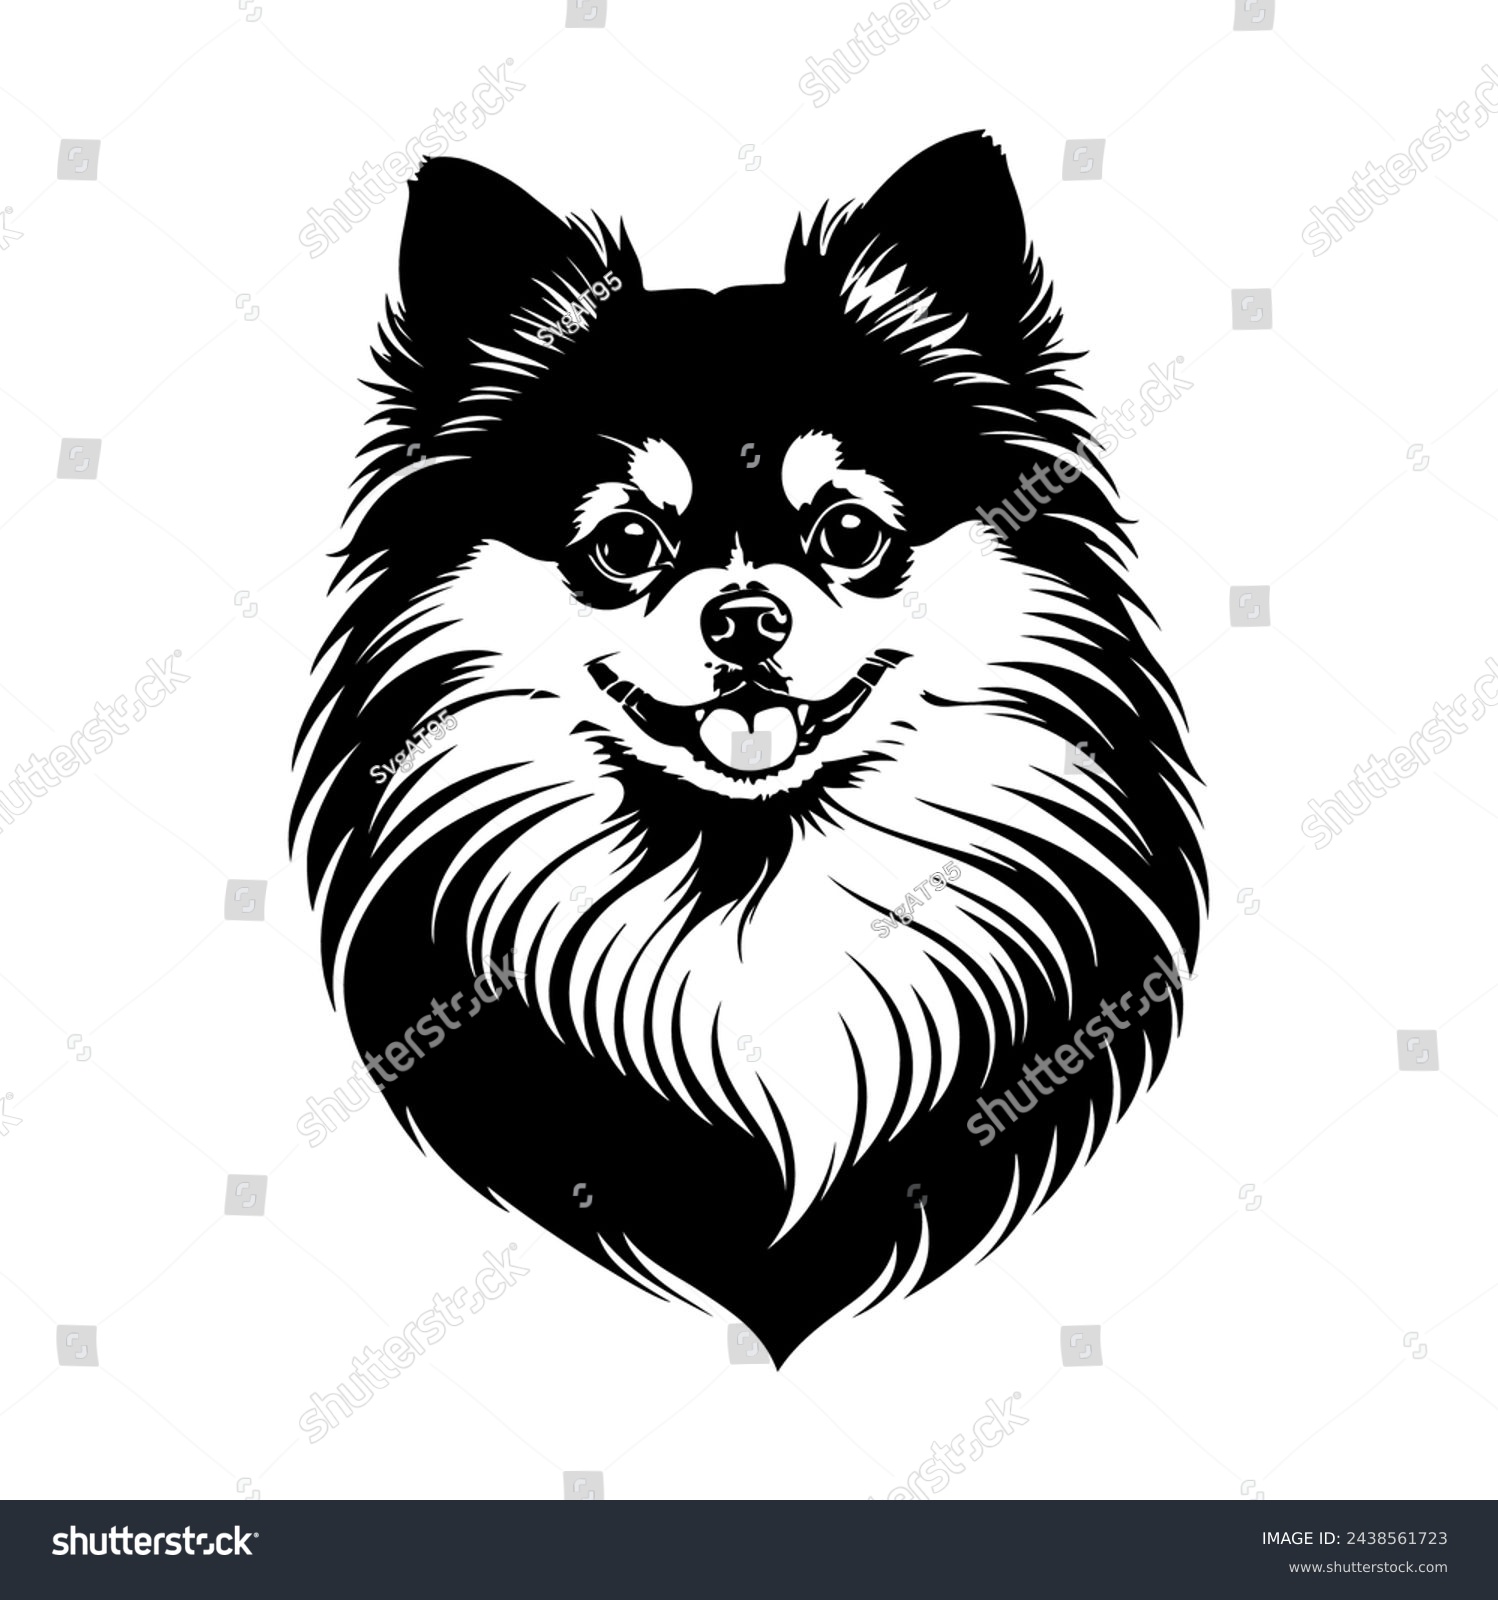 SVG of Portrait of a Pomeranian Dog Vector isolated on white background, Dog Silhouettes. svg